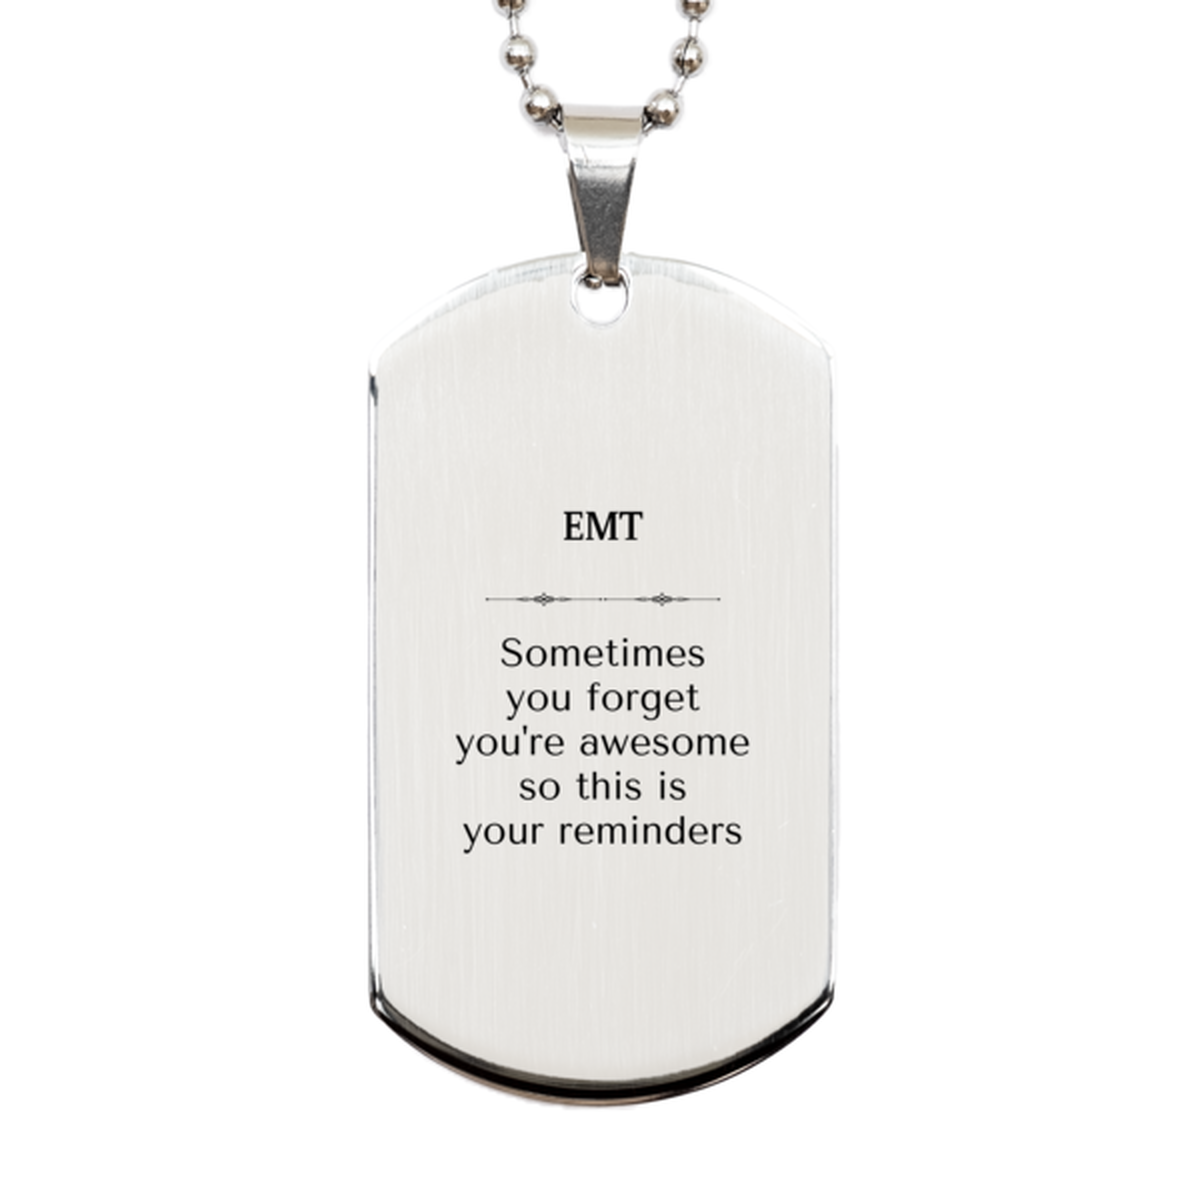 Sentimental EMT Silver Dog Tag, EMT Sometimes you forget you're awesome so this is your reminders, Graduation Christmas Birthday Gifts for EMT, Men, Women, Coworkers